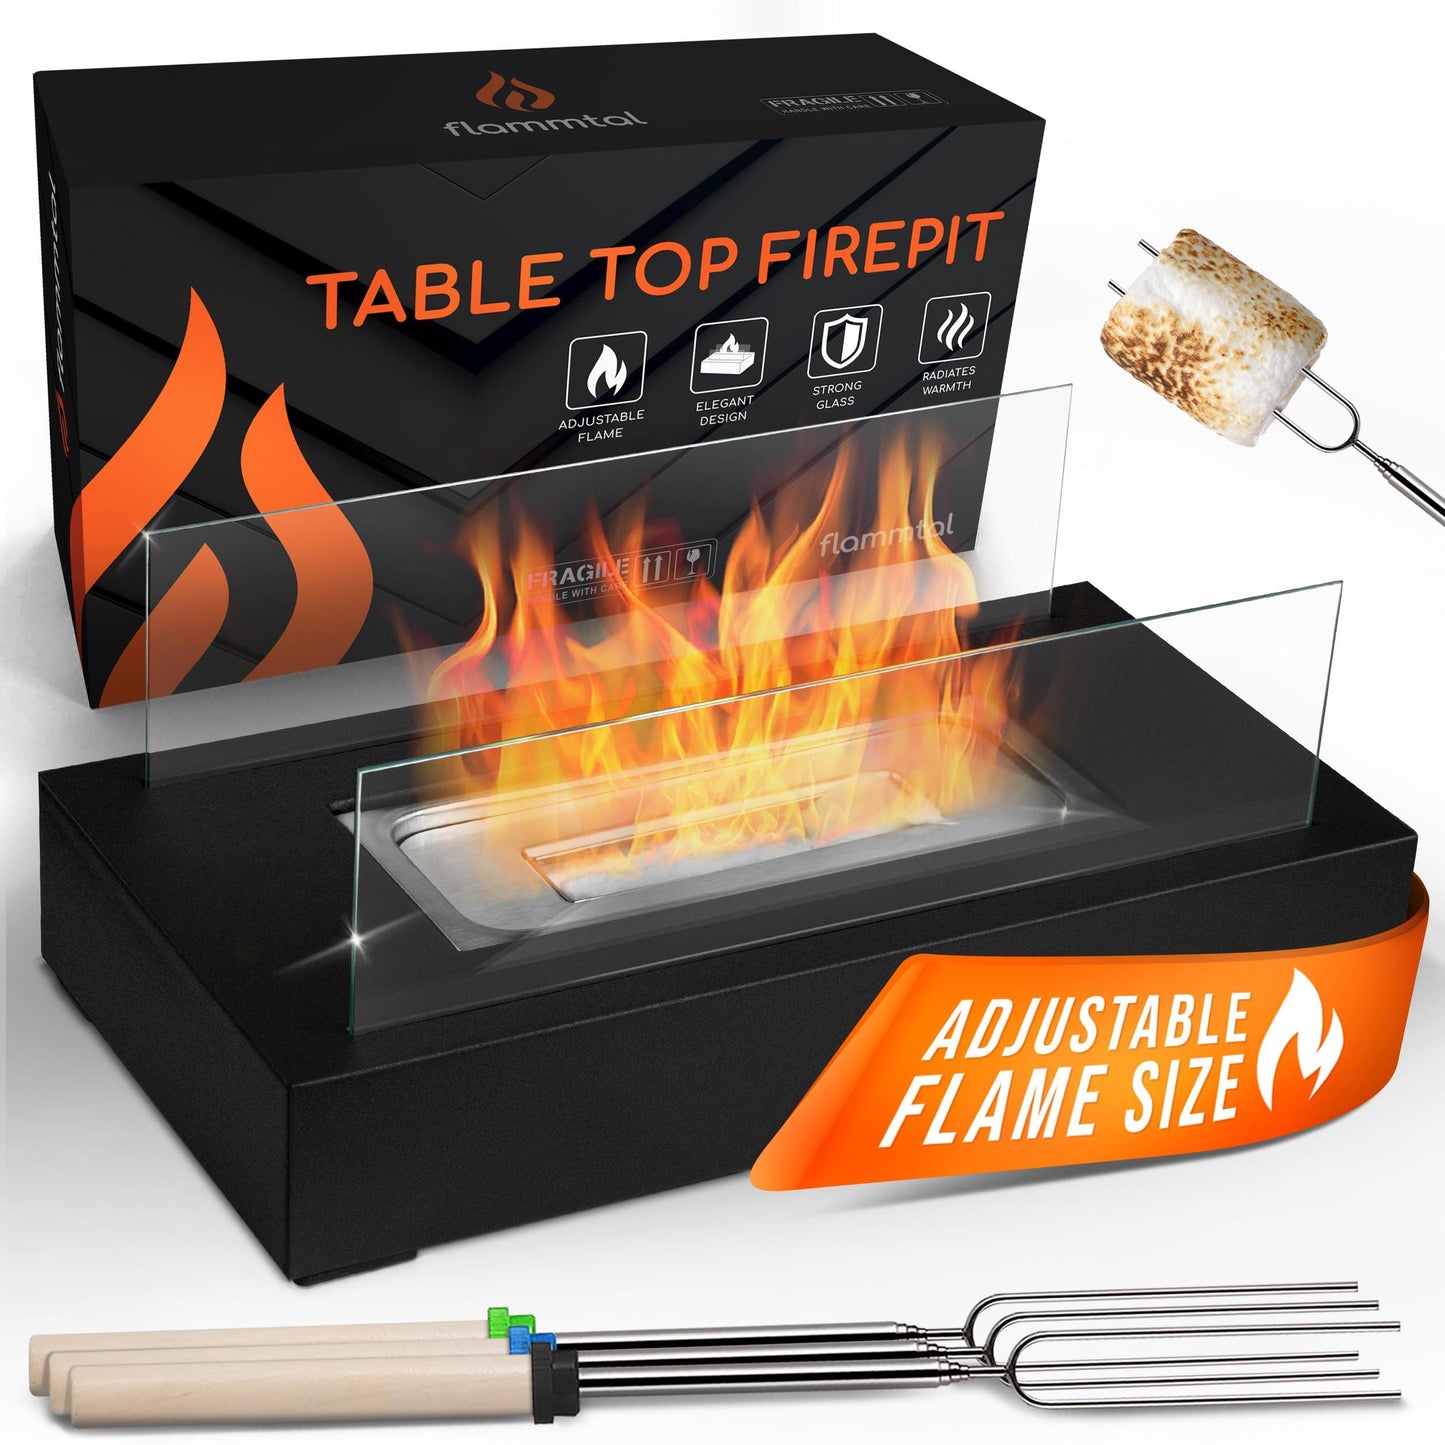 Flammtal Ethanol Tabletop Fire Pit - 3h Burn Time, Portable Indoor & Outdoor S'mores Maker with 4 Roasting Sticks and Adjustable Flames - CookCave